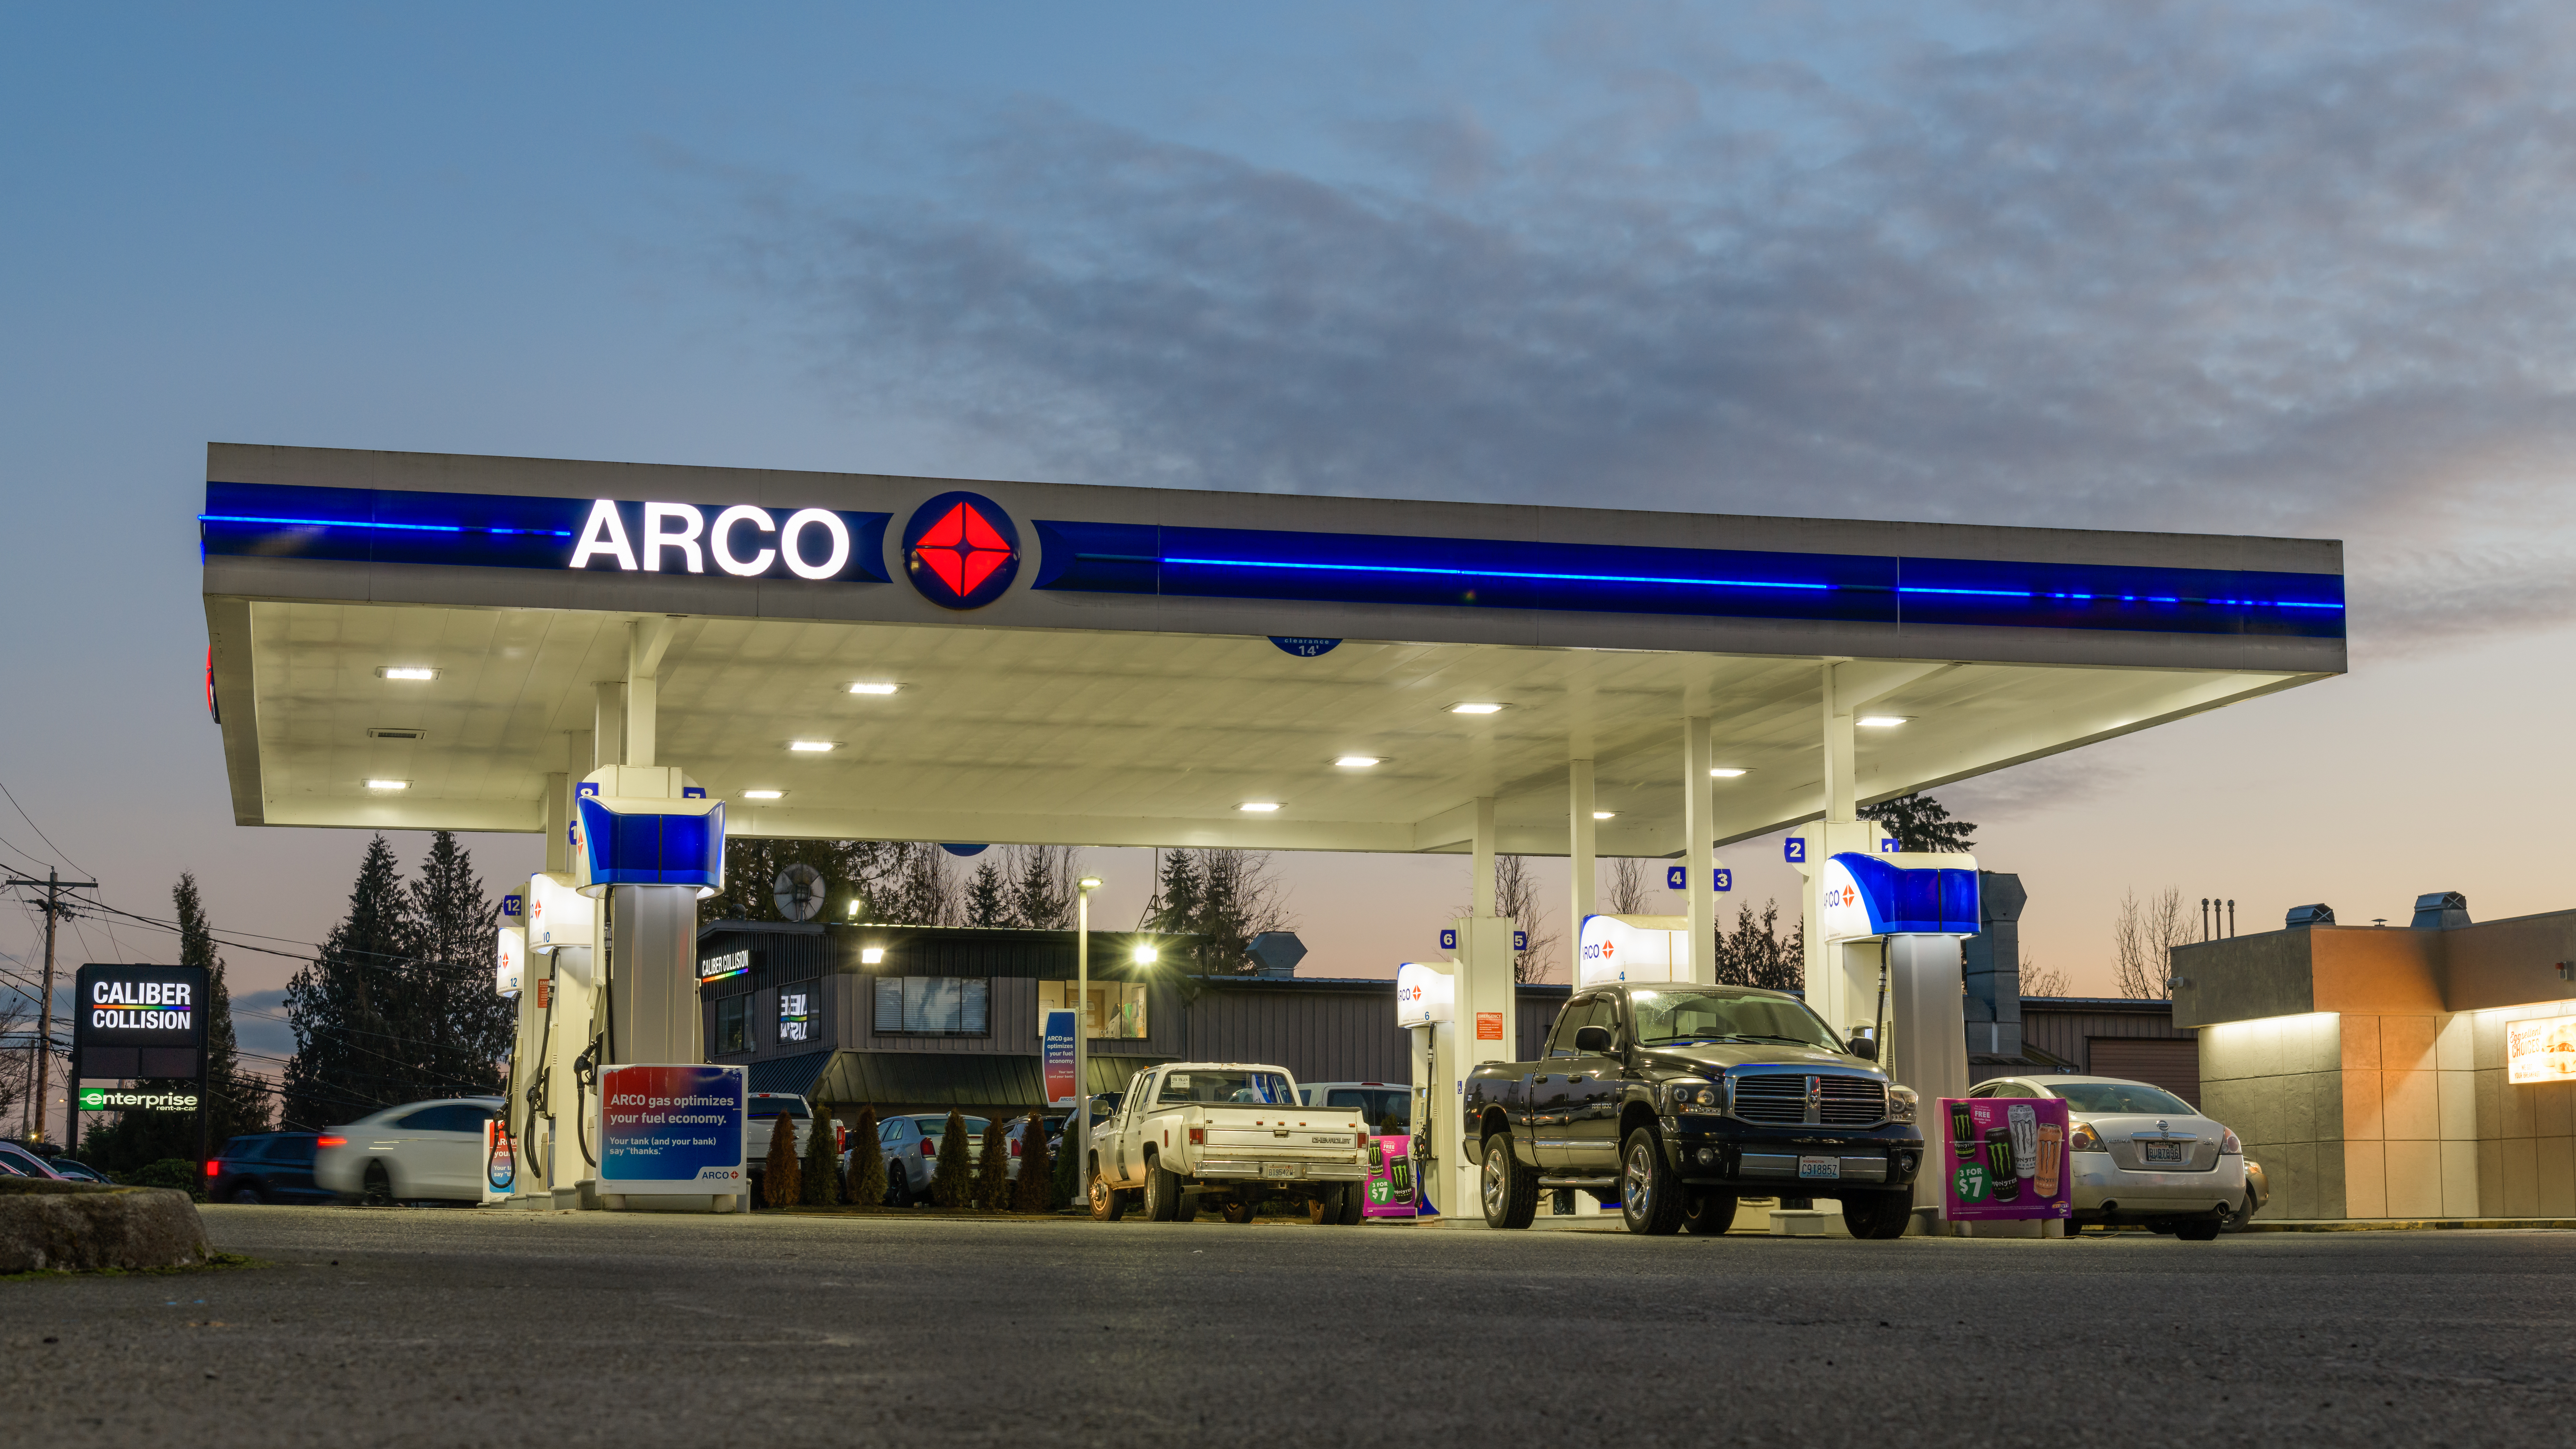 Arco gas station